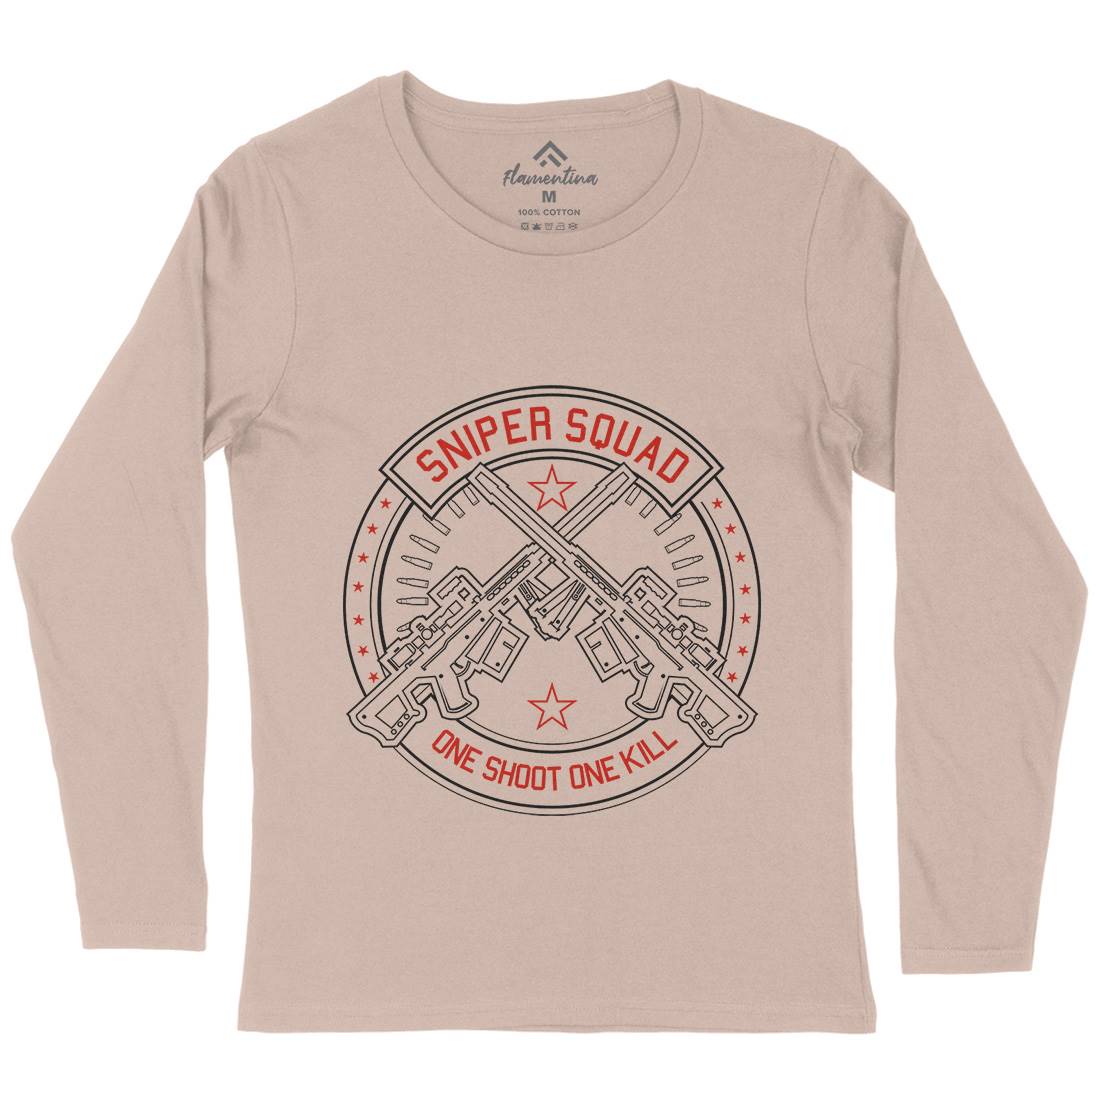 Sniper Squad Womens Long Sleeve T-Shirt Army A279